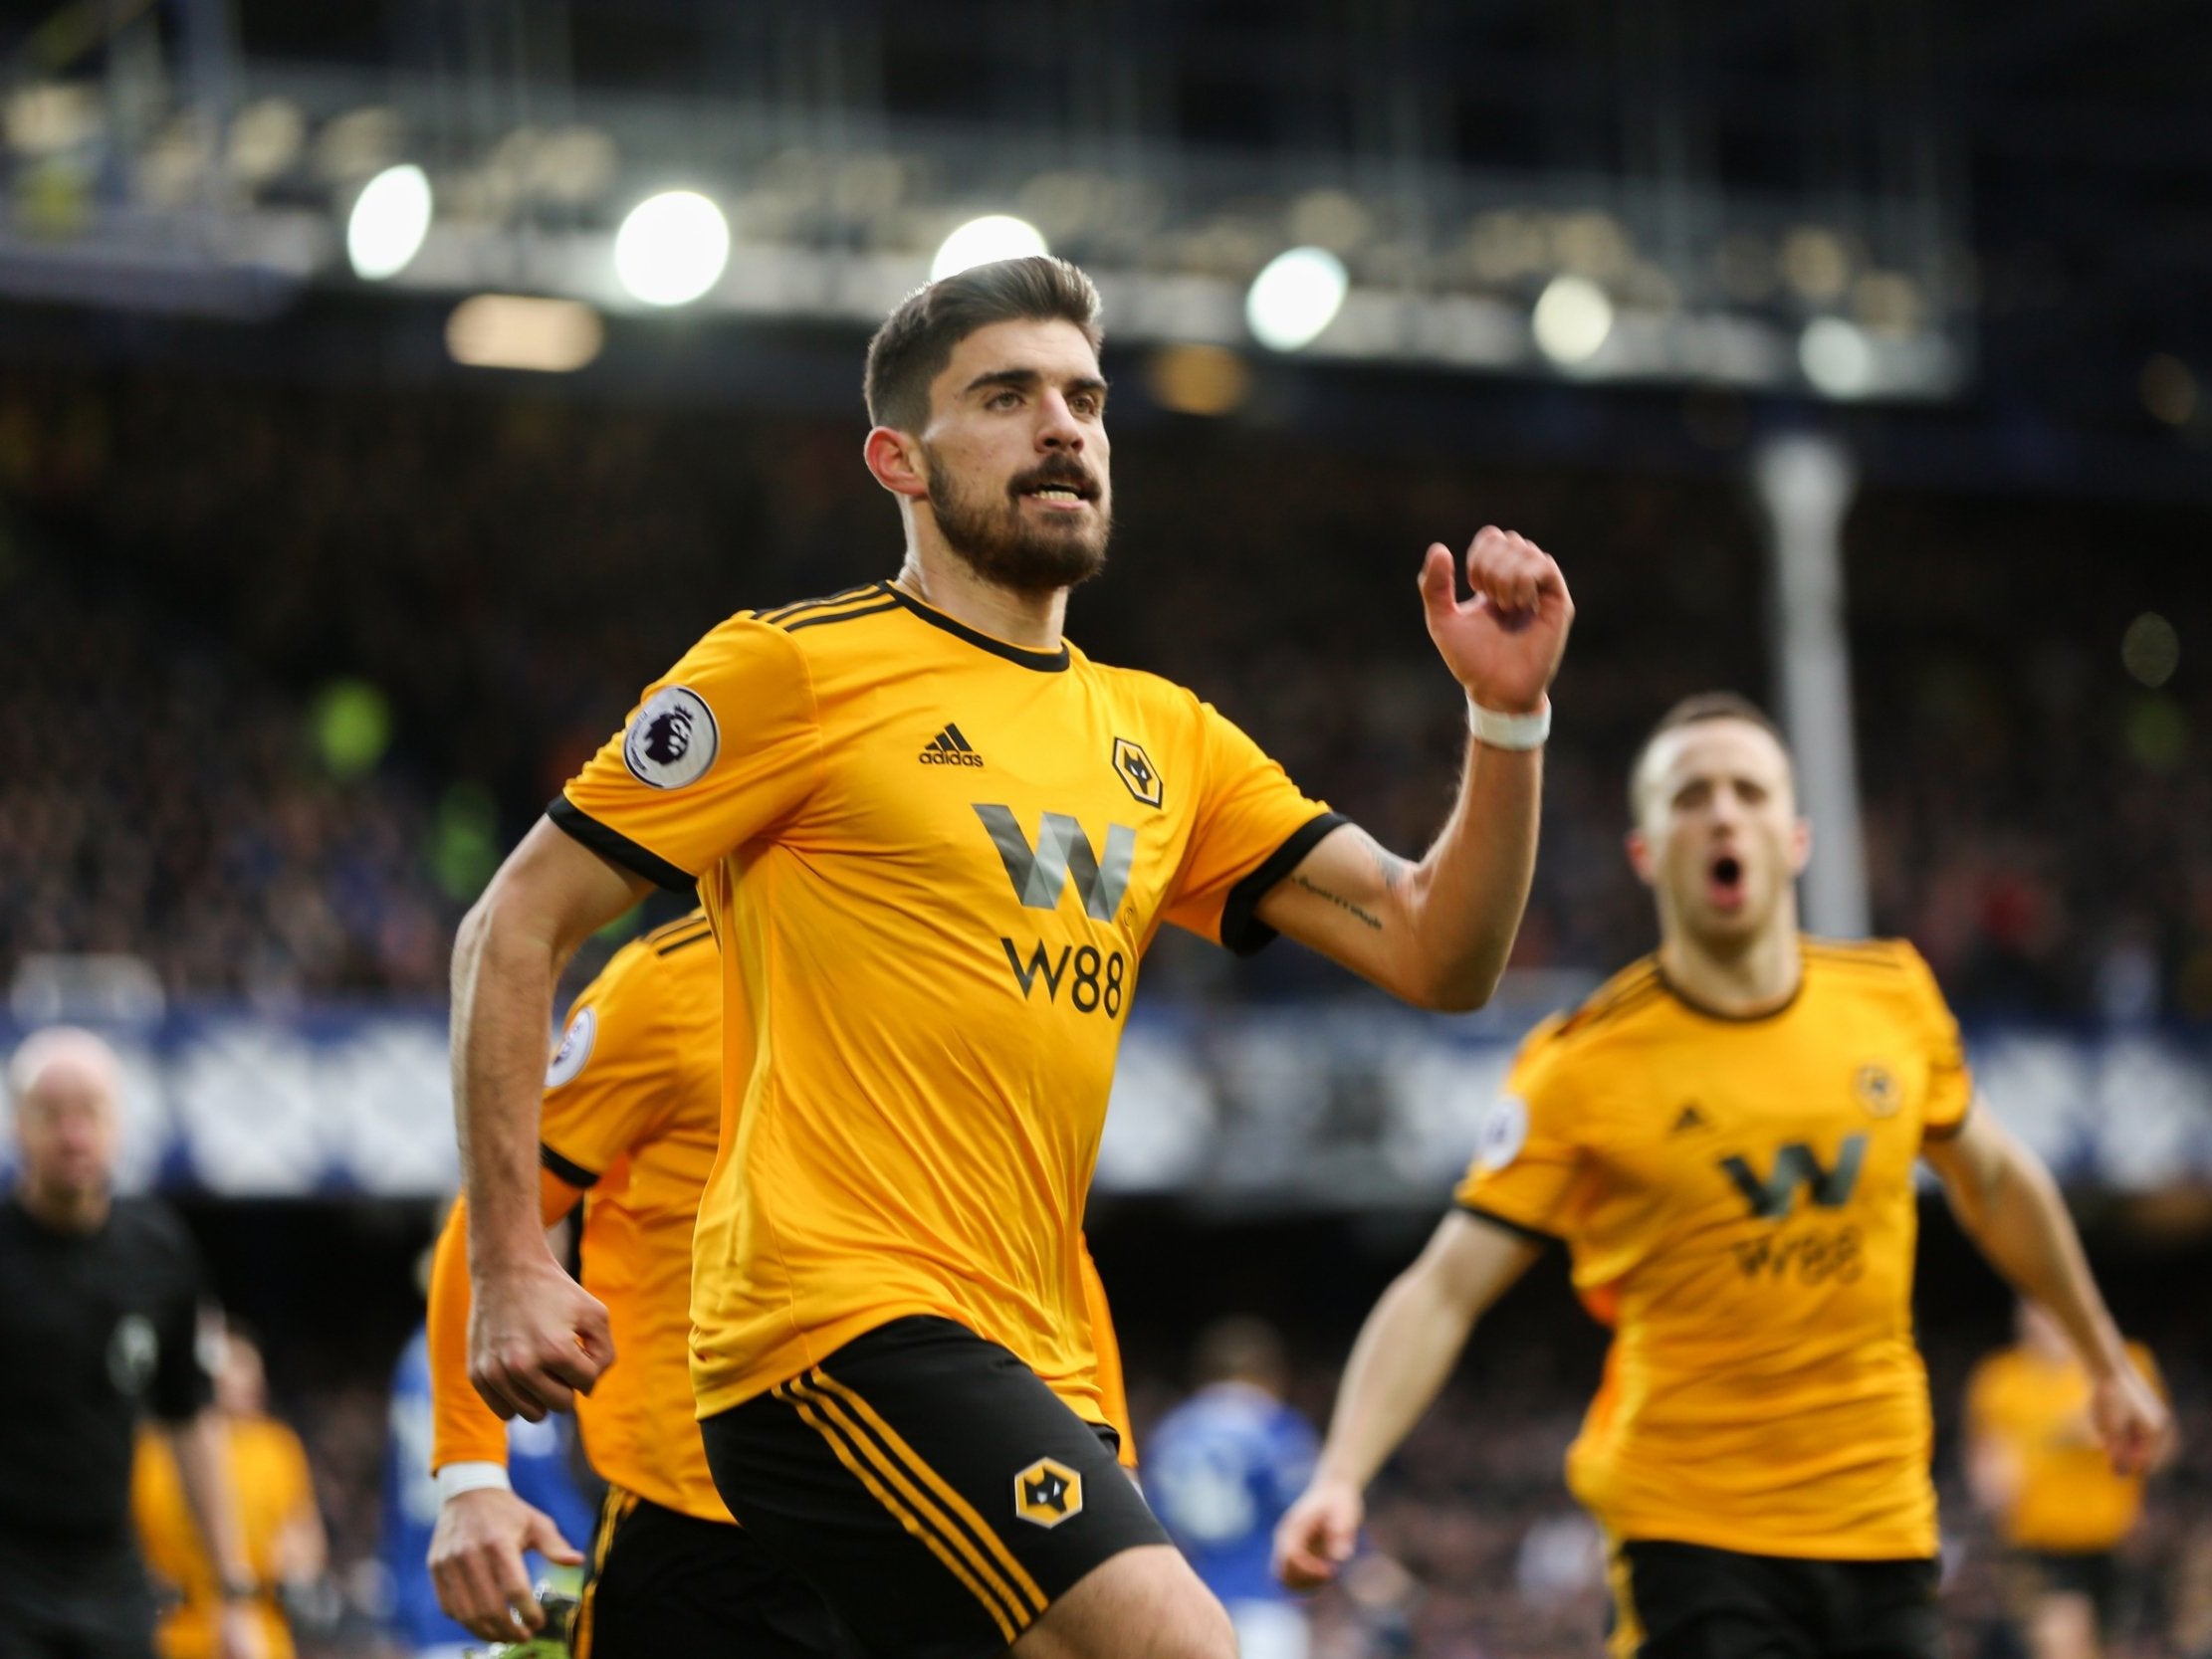 Wolves condemned Everton to their seventh defeat in nine games